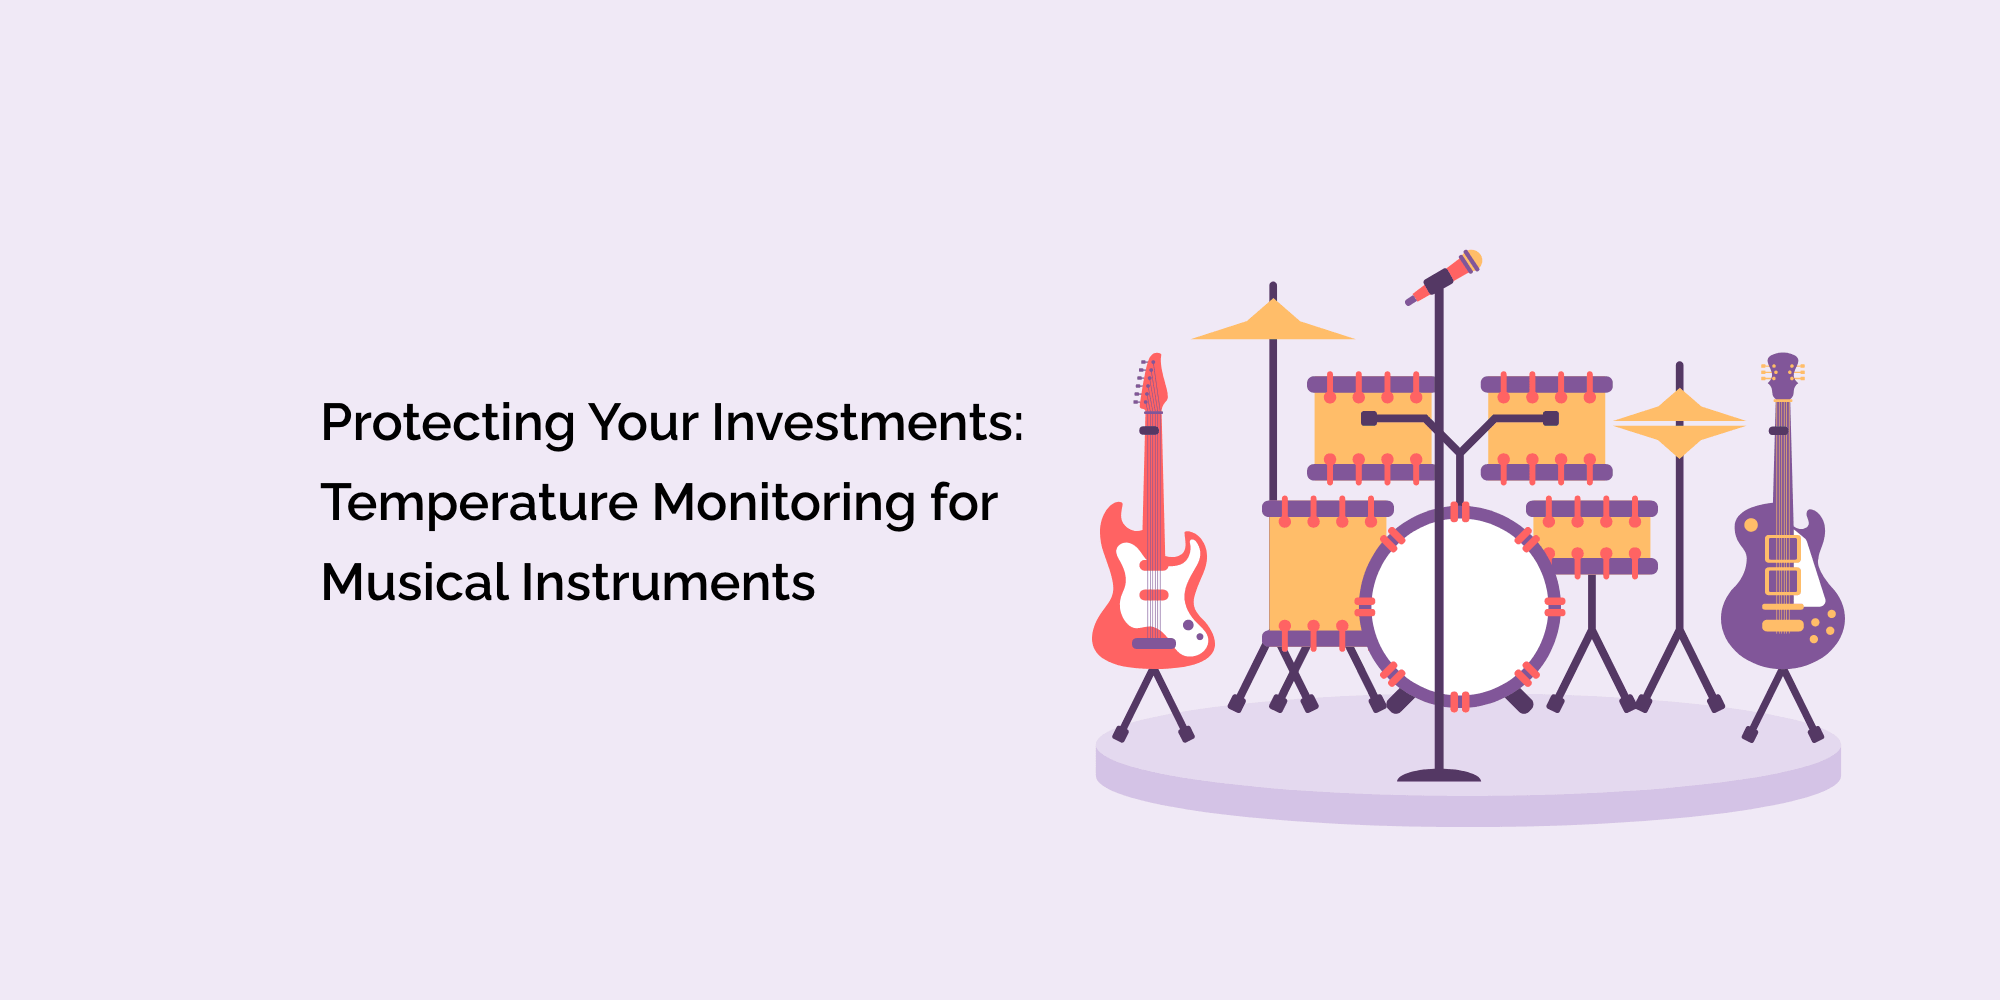 Protecting Your Investments: Temperature Monitoring for Musical Instruments